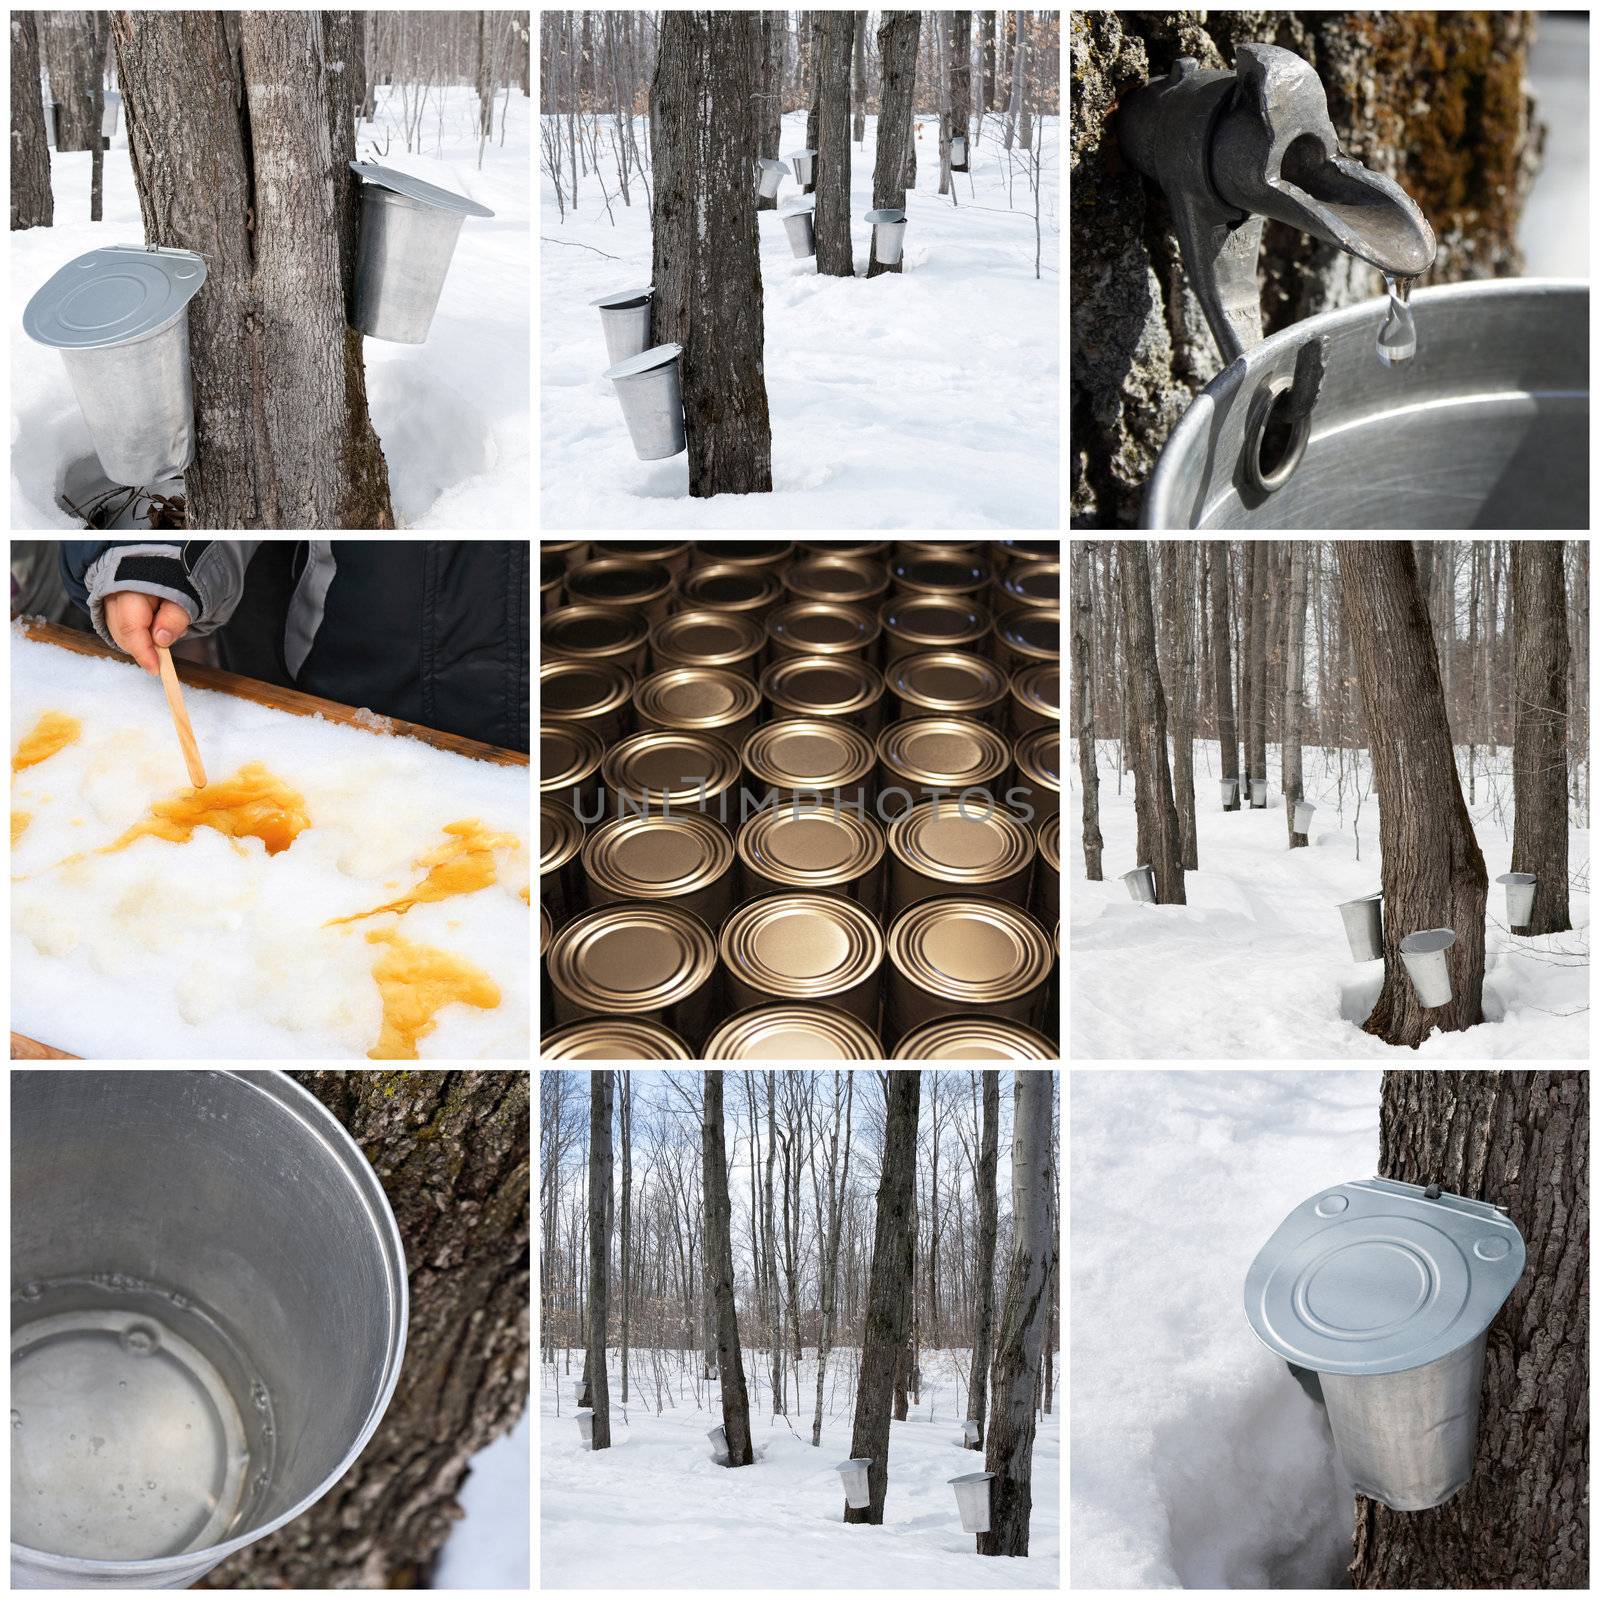 Maple syrup production by anikasalsera